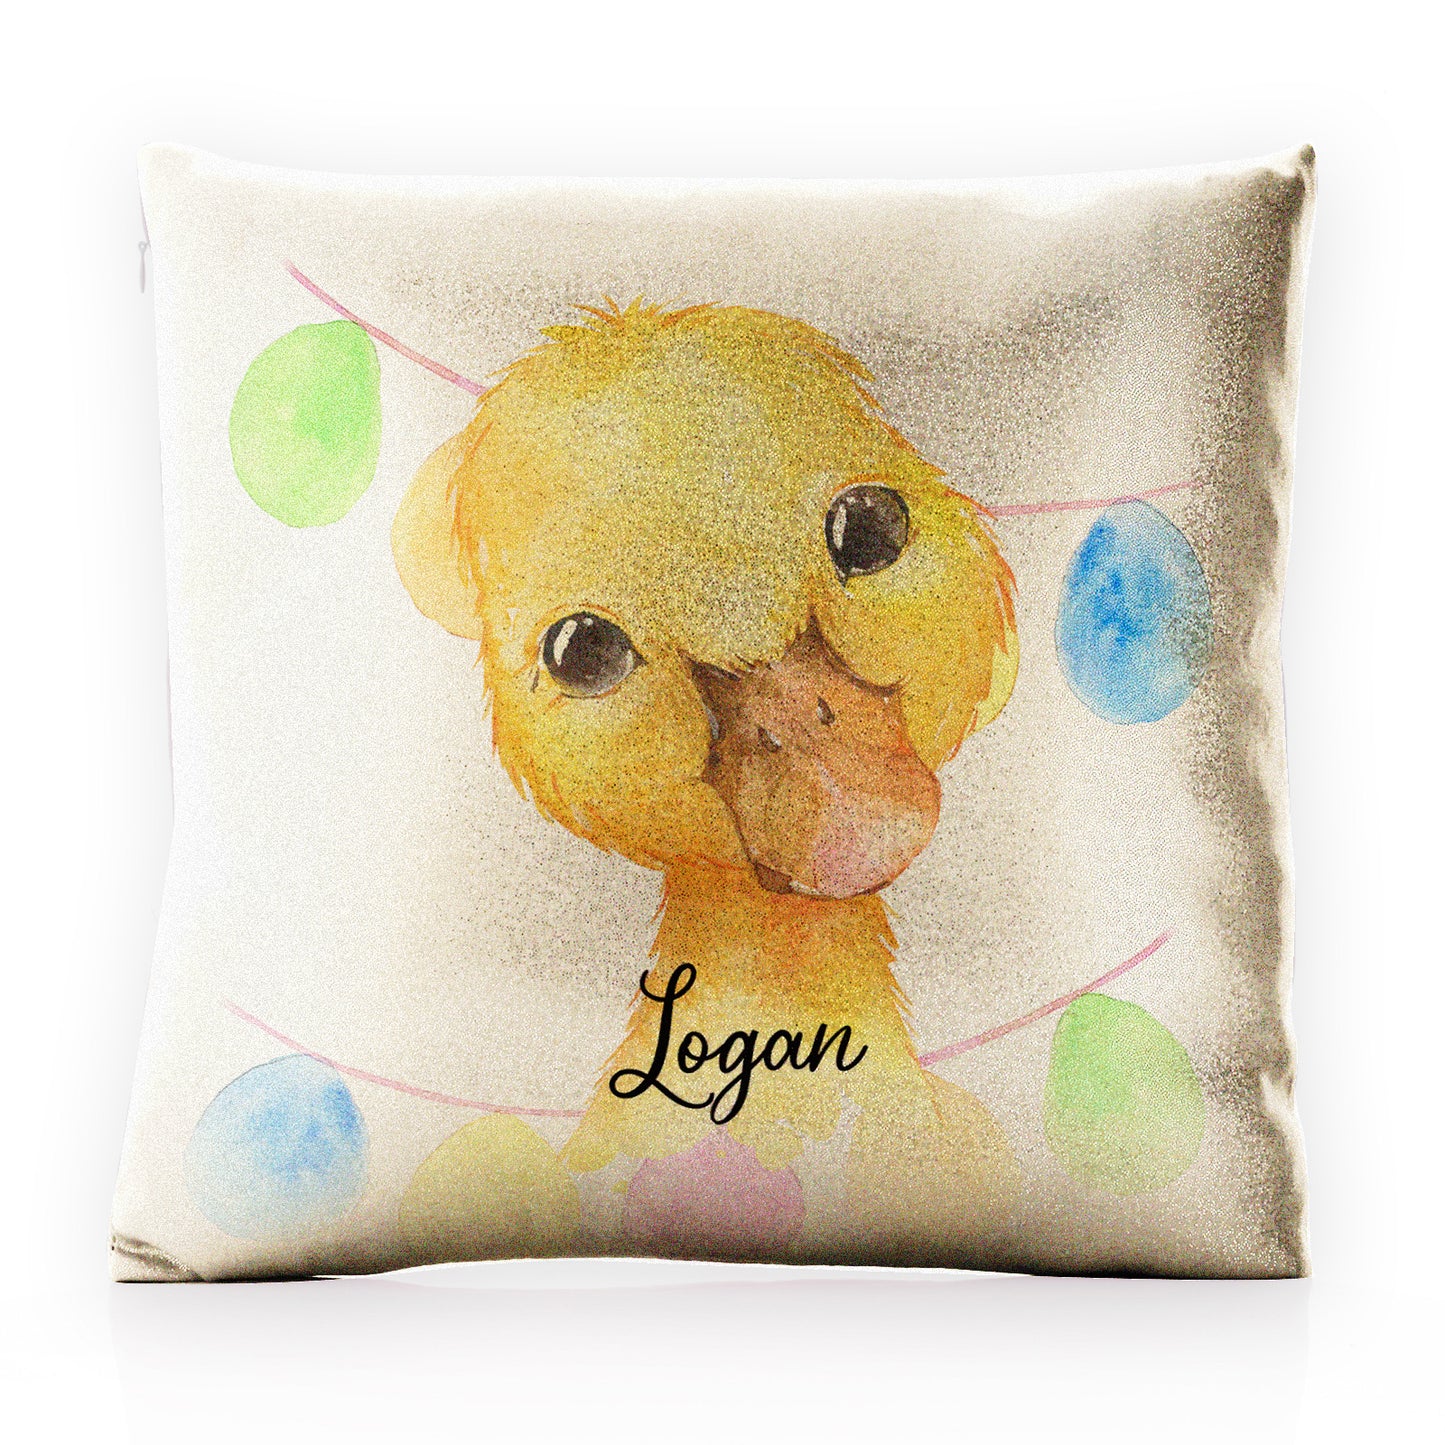 Personalised Glitter Cushion with Yellow Duck Multicolour Buntin and Cute Text